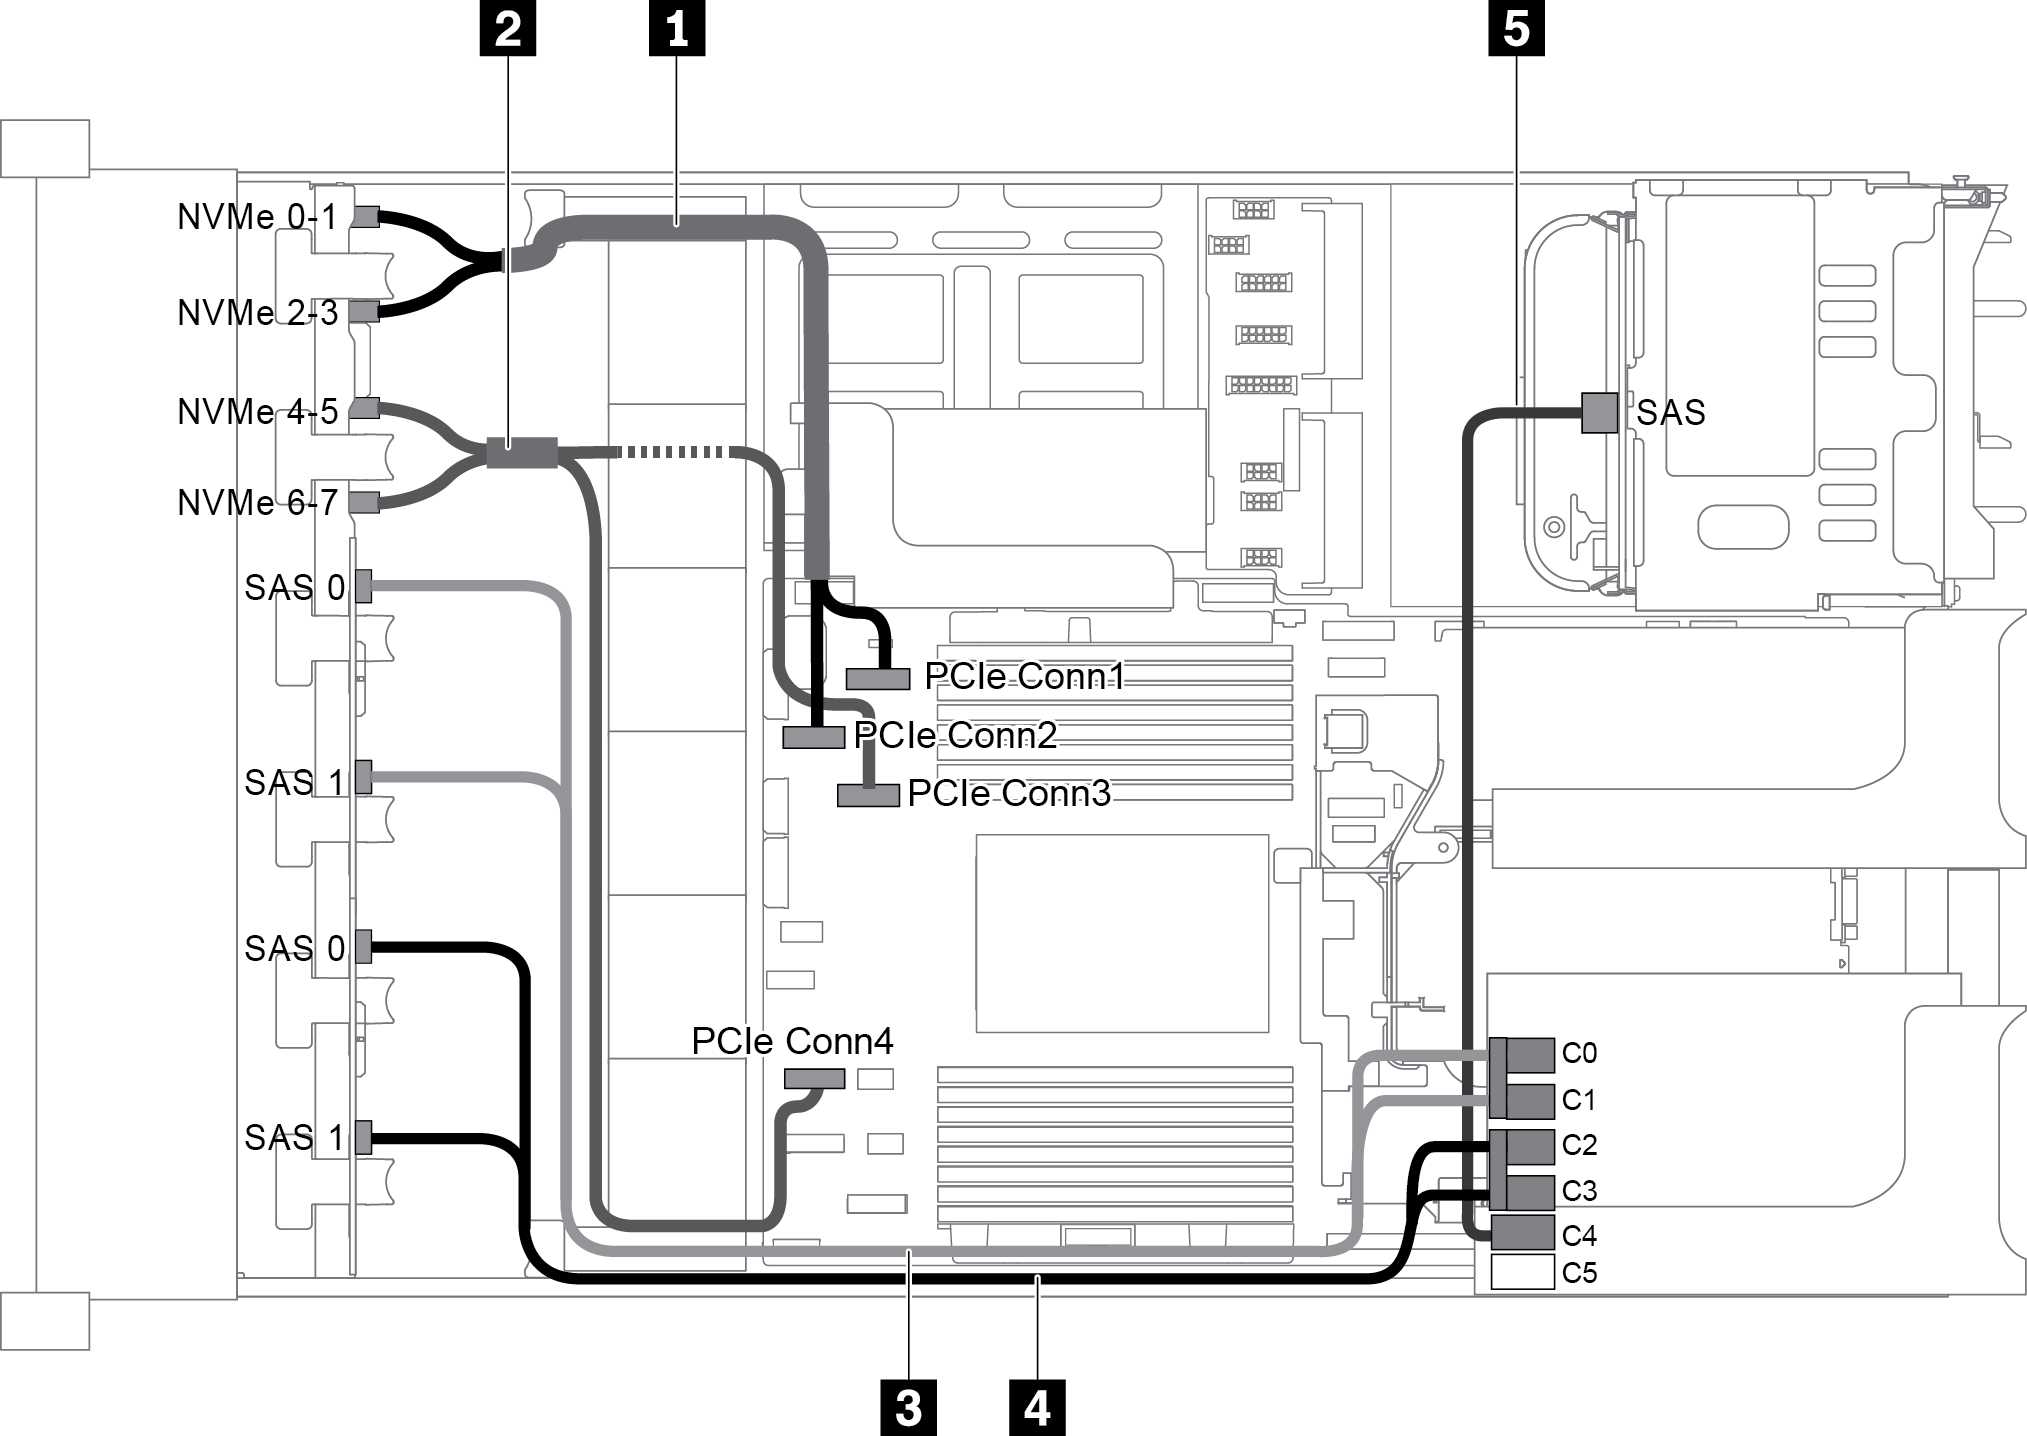 Cable routing for configuration with three front backplanes (8 NVMe + 2 x 8 SAS/SATA), one rear drive cage, and one 24i RAID adapter